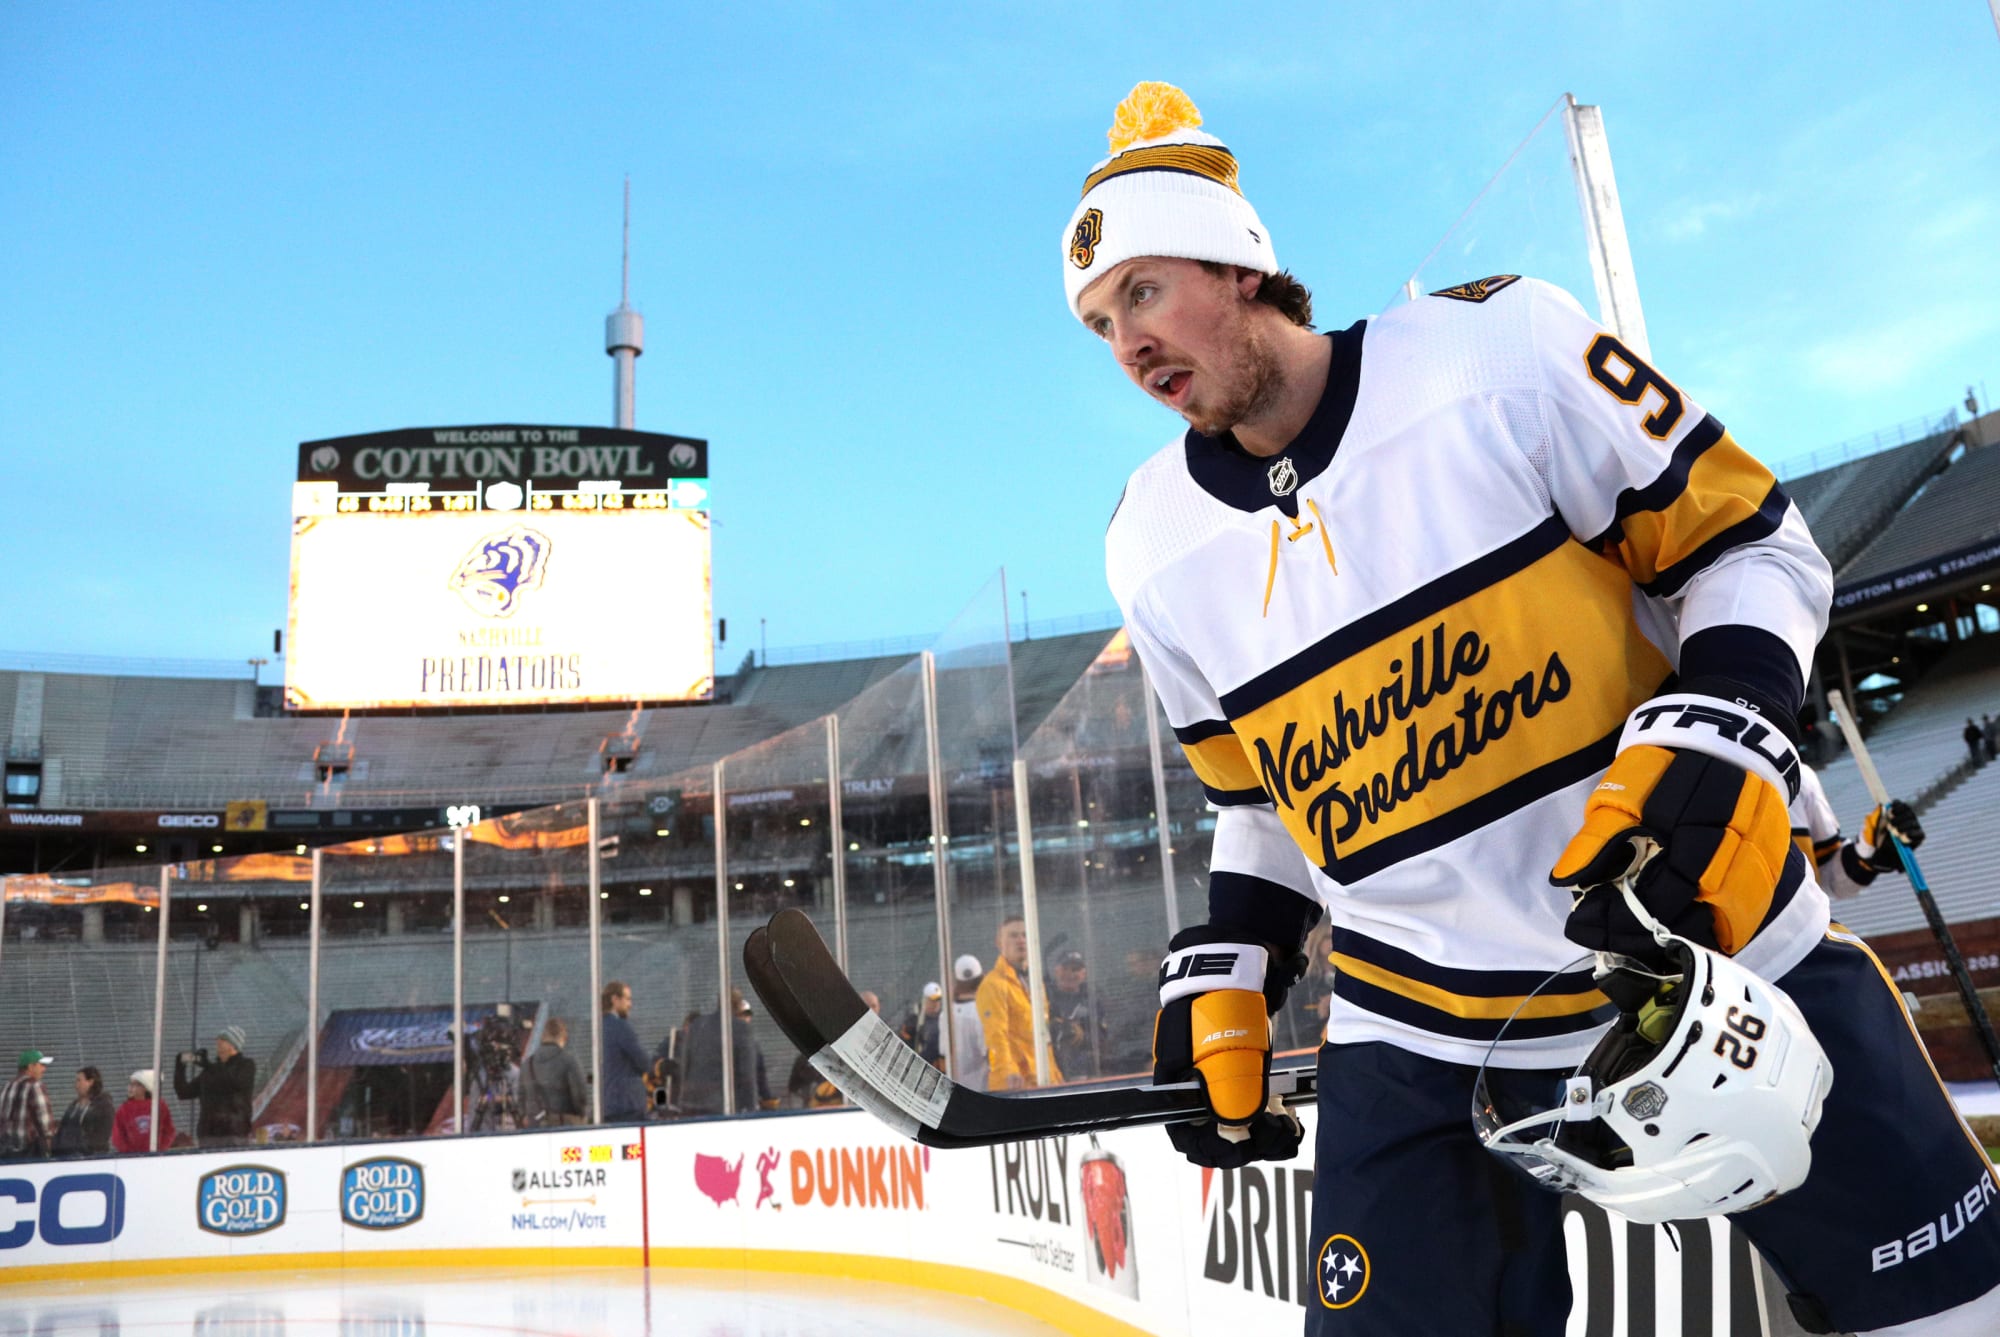 Look: Stars and Predators Release Images of 2020 Winter Classic